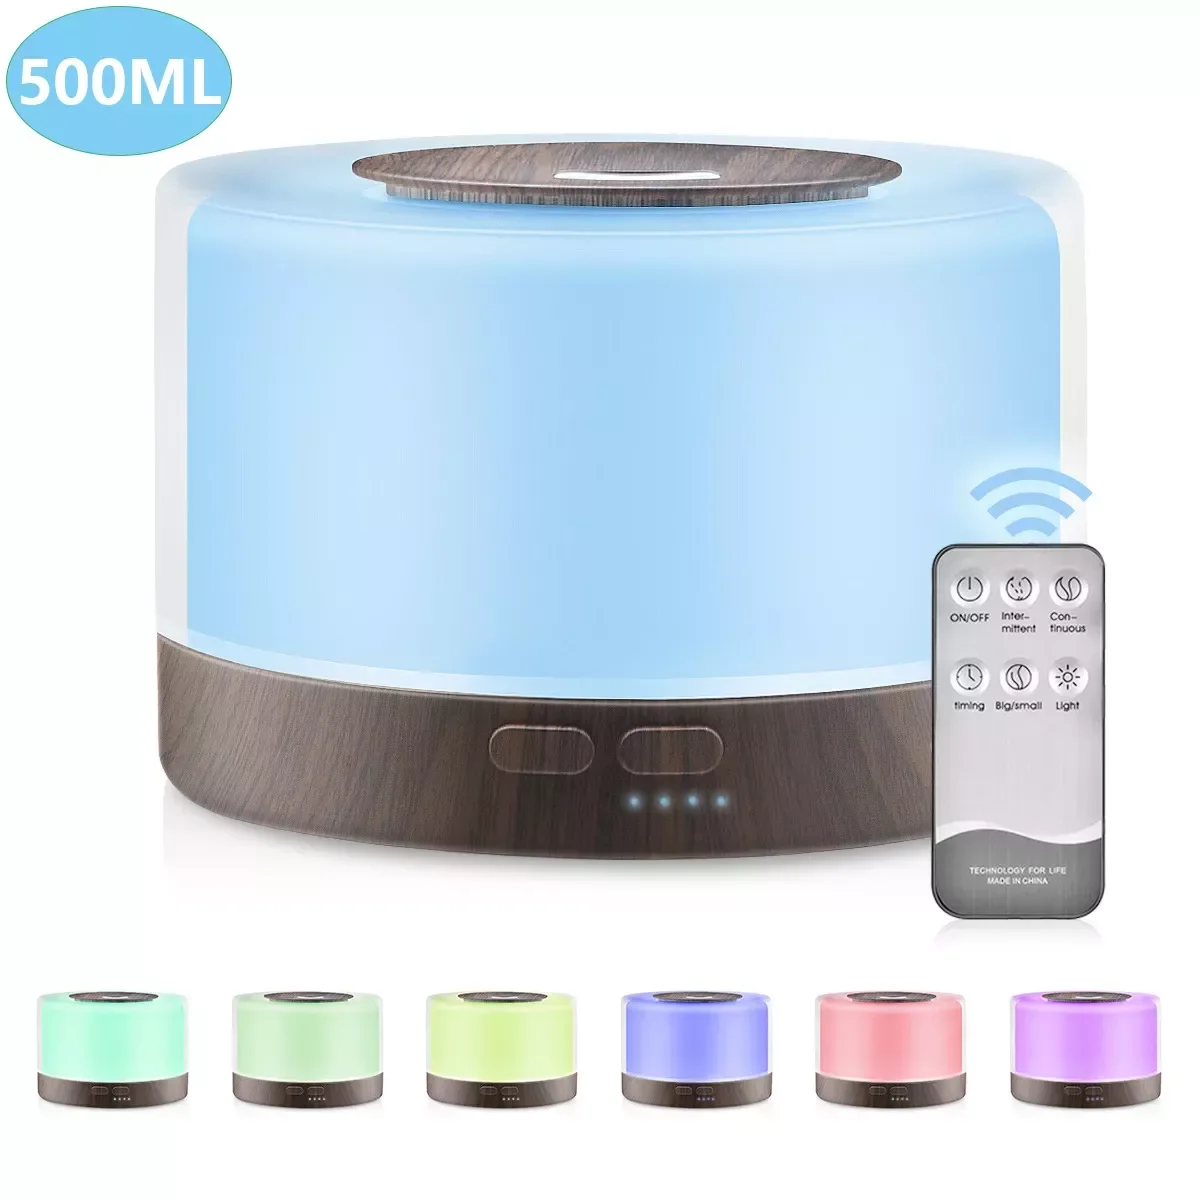 Aromatherapy Diffuser Xiomi Air Humidifier with LED Light Home Room Ultrasonic Cool Mist Aroma Essential Oil Diffuser